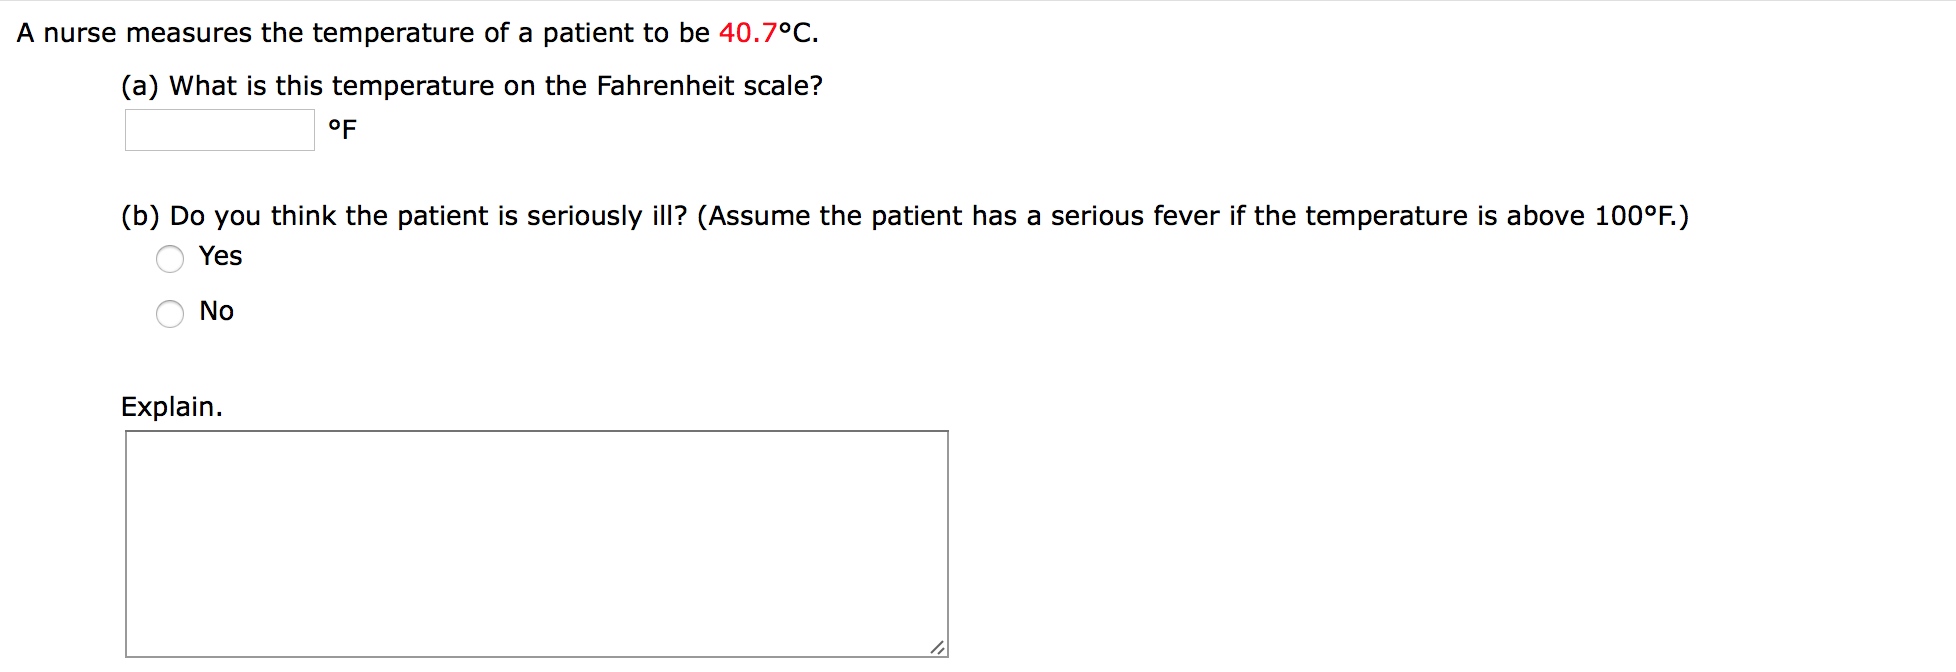 A nurse measures the temperature of a patient to be 40.7°C
(a) What is this temperature on the Fahrenheit scale?
°F
(b) Do you think the patient is seriously ill? (Assume the patient has a serious fever if the temperature is above 100°F.)
Yes
No
Explain
